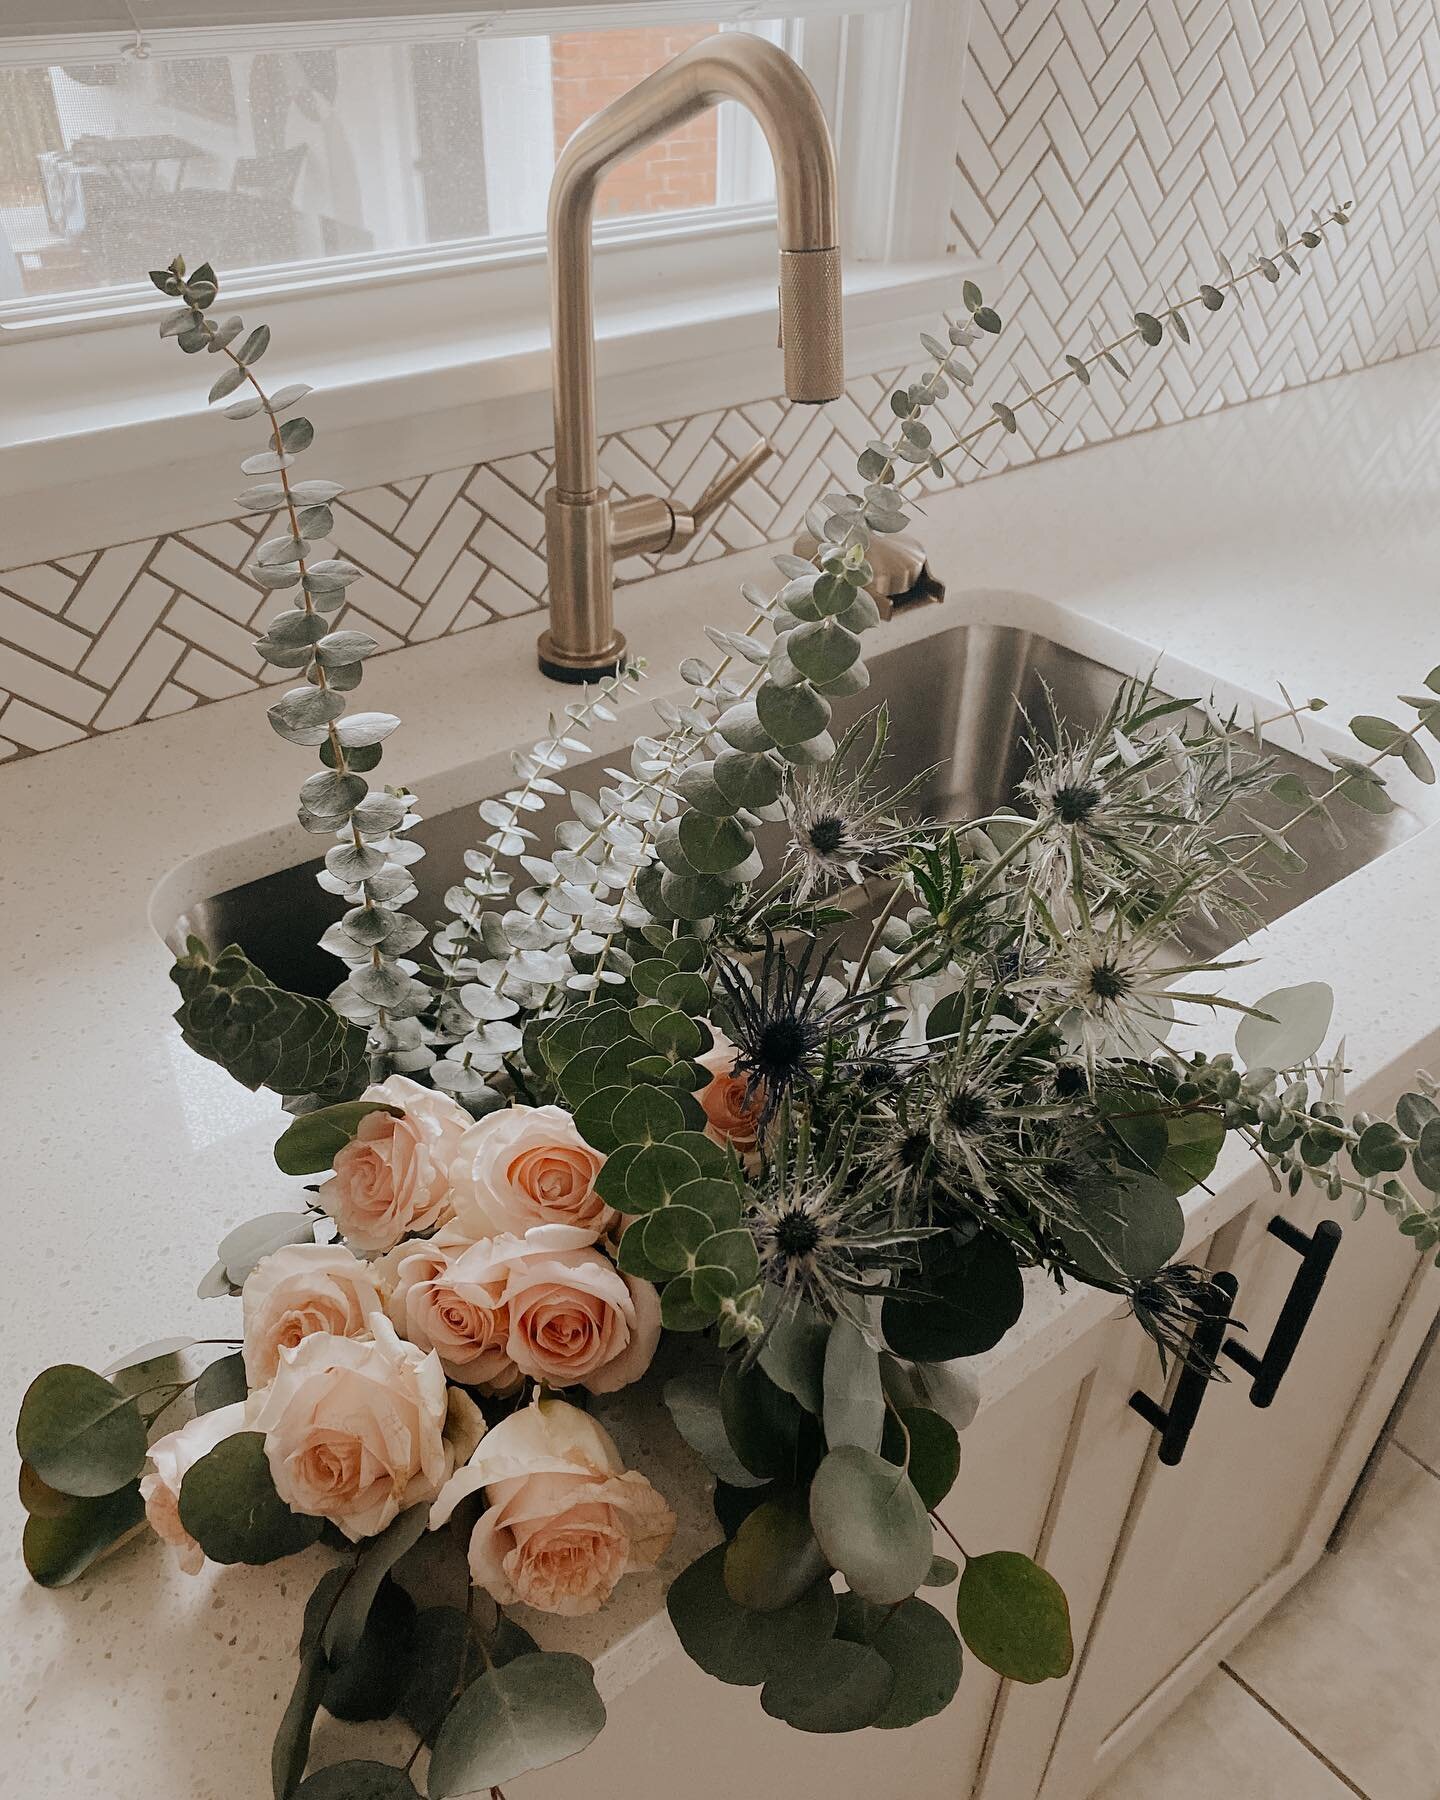 Fresh blooms + our beautiful @brizofaucet makes for quite the moment. ✨
.
.
The features of this faucet are just as awesome as the design. Plumbing fixtures are always an opportunity for a wow factor at PH. 
.
.
#faucet 
#brizo 
#kitchendesign 
#kitc